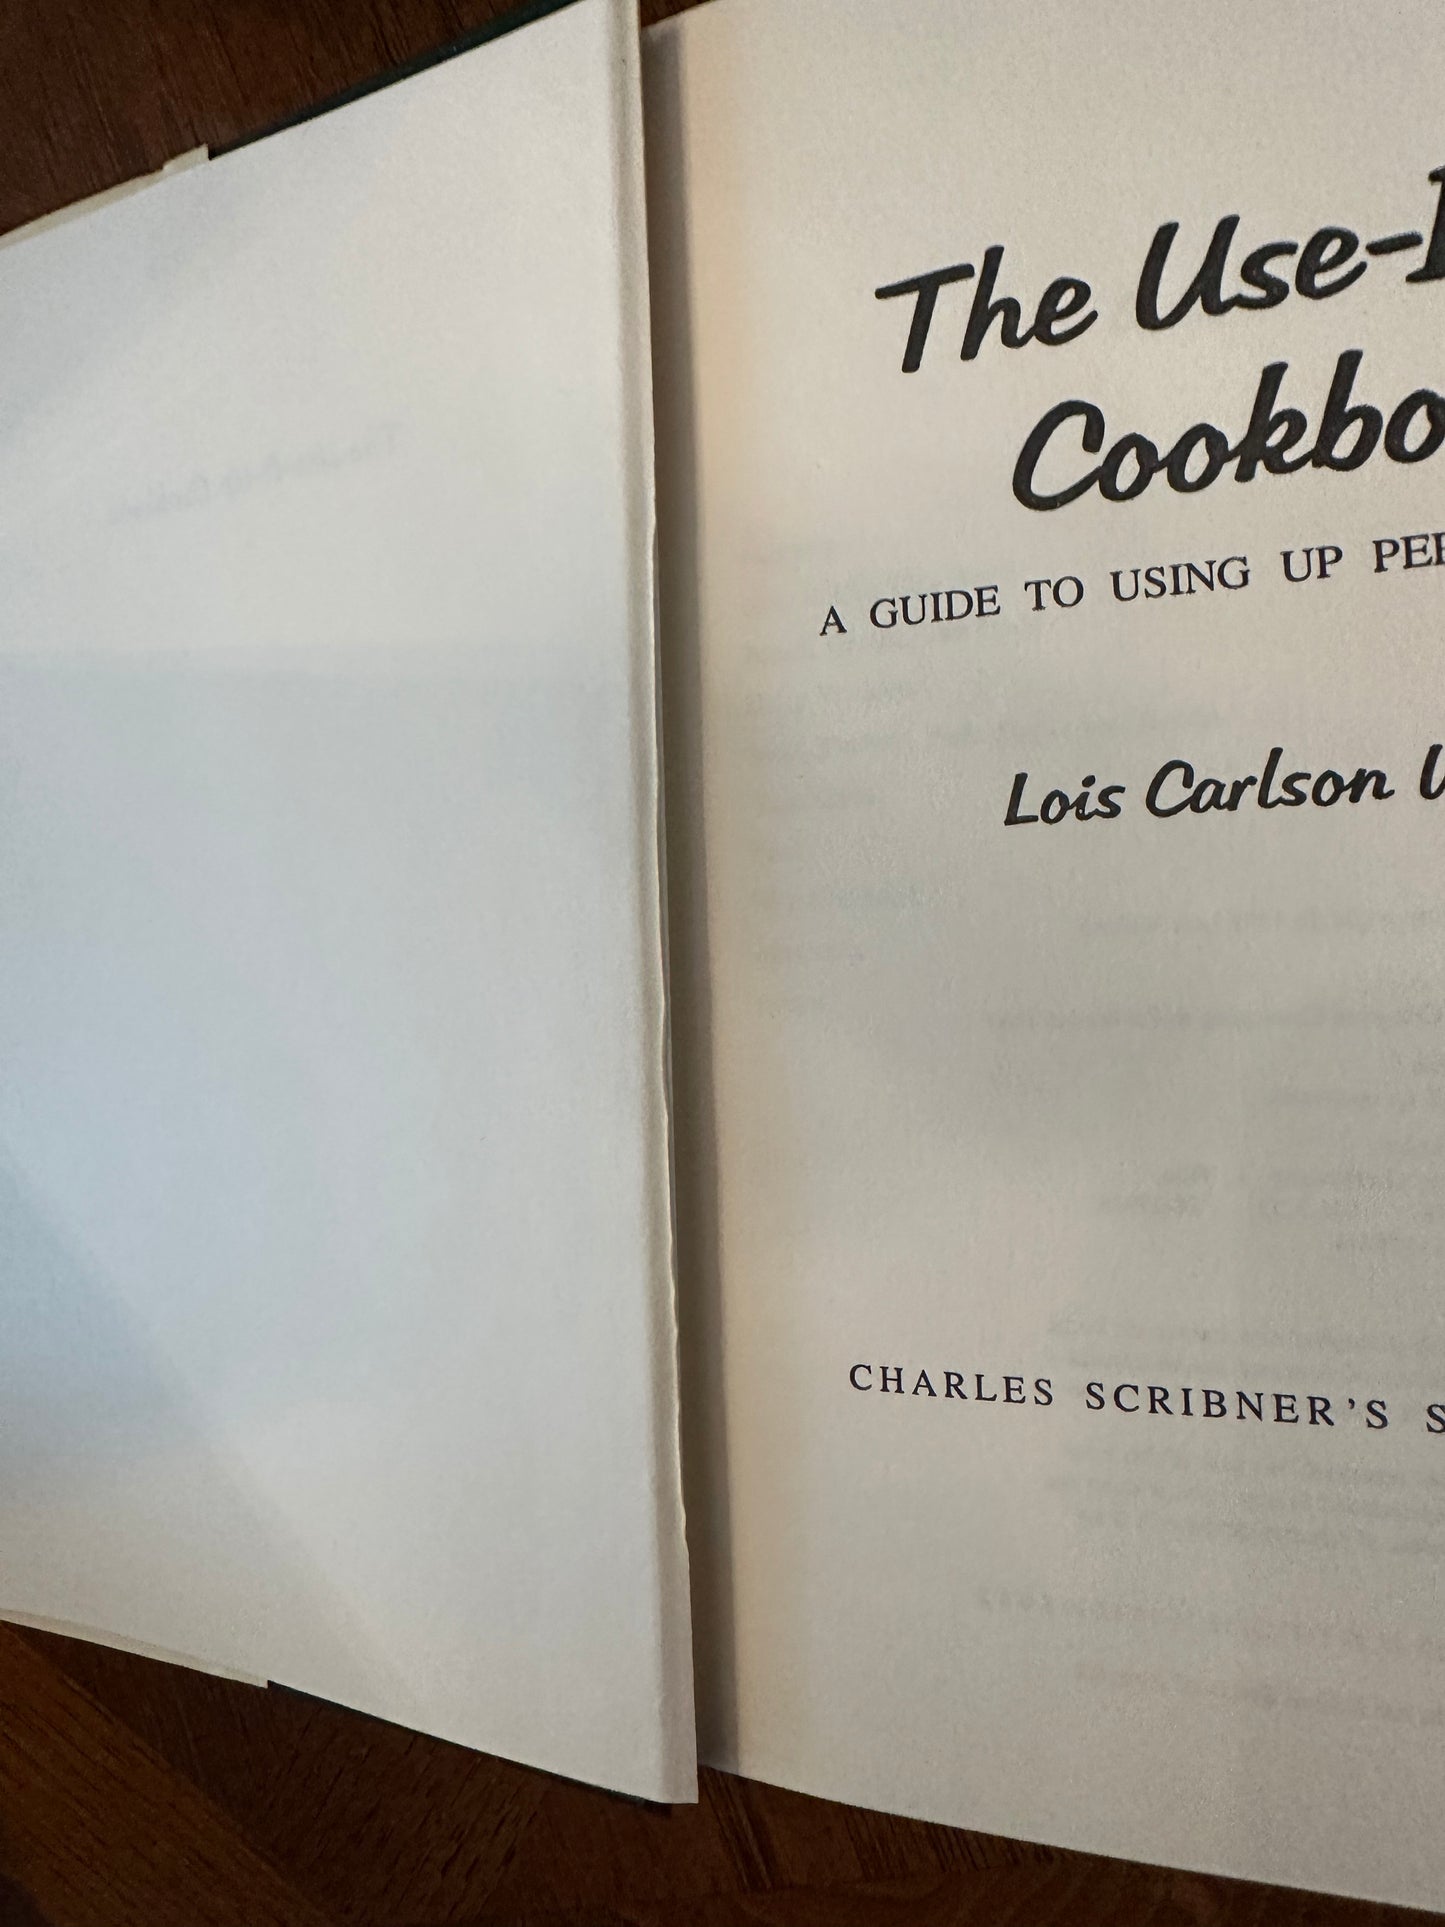 THE USE-IT-UP COOKBOOK (1979) by Lois Carlson Willand  (signed by author) Using Perishable Foods